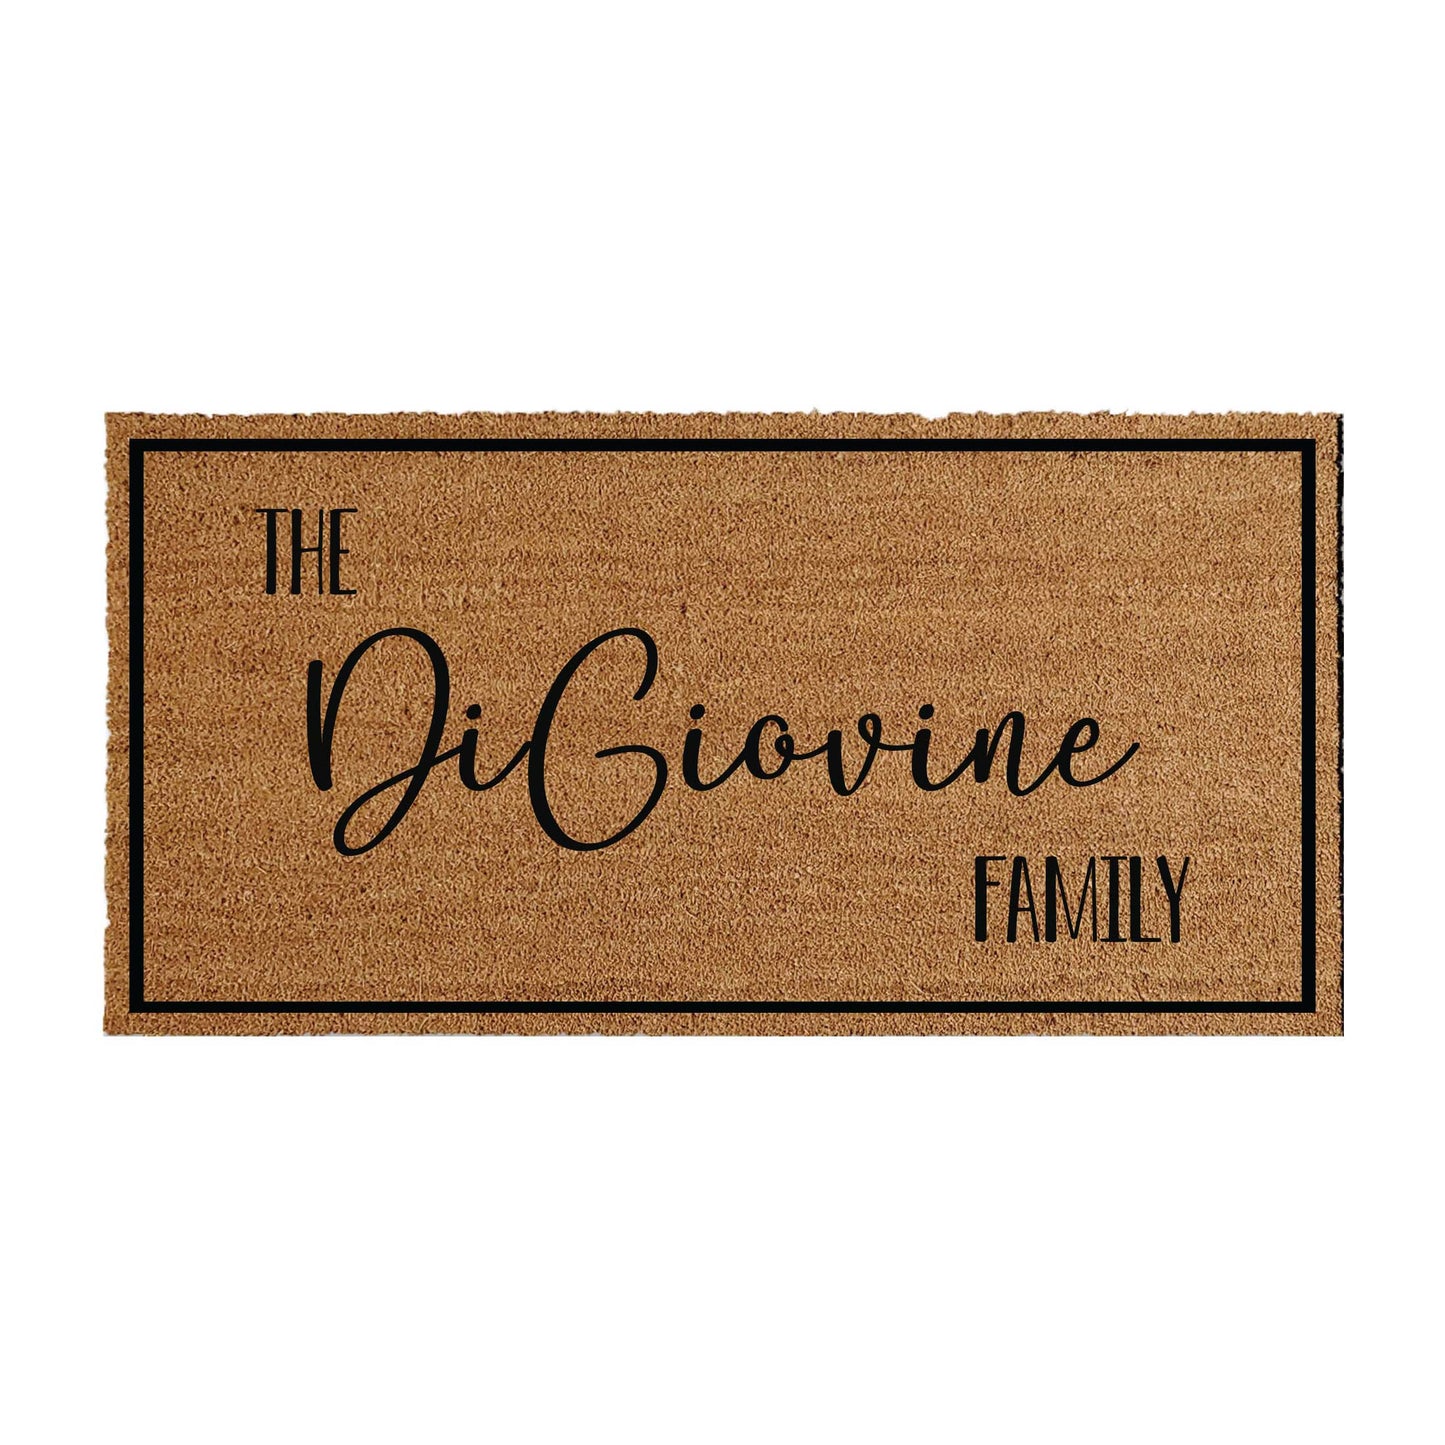 Custom coir doormat measuring 48 inches by 96 inches, featuring a personalized design or message. Made from natural coir fibers for durability and a classic look. Perfect for adding a welcoming touch to your entryway.